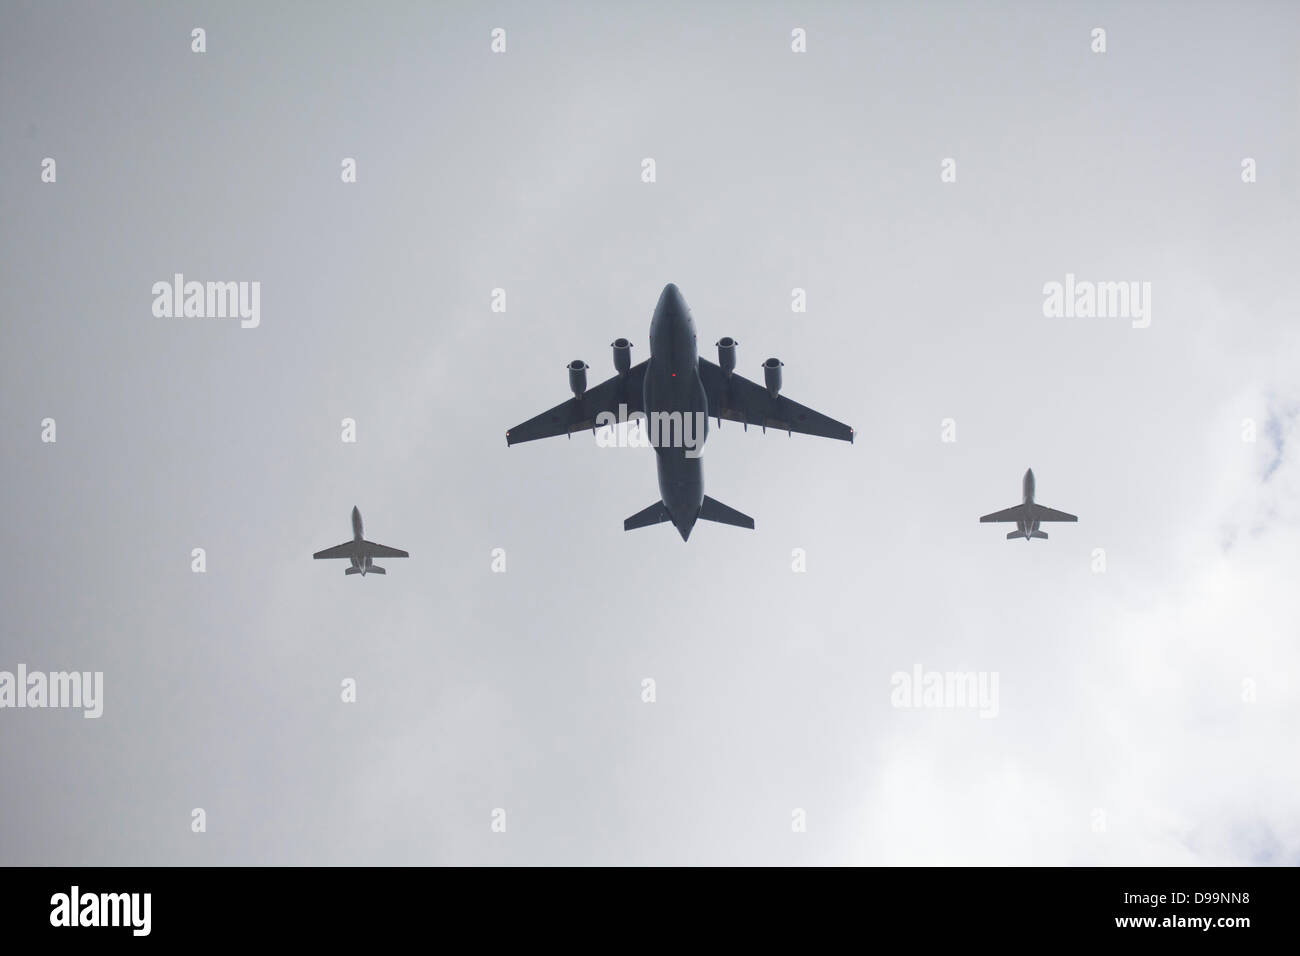 London, UK. 15th June 2013. Fly-pass over central London with military planes flying over the city in celebration for the Queens official birthday. Credit:  Sebastian Remme/Alamy Live News Stock Photo